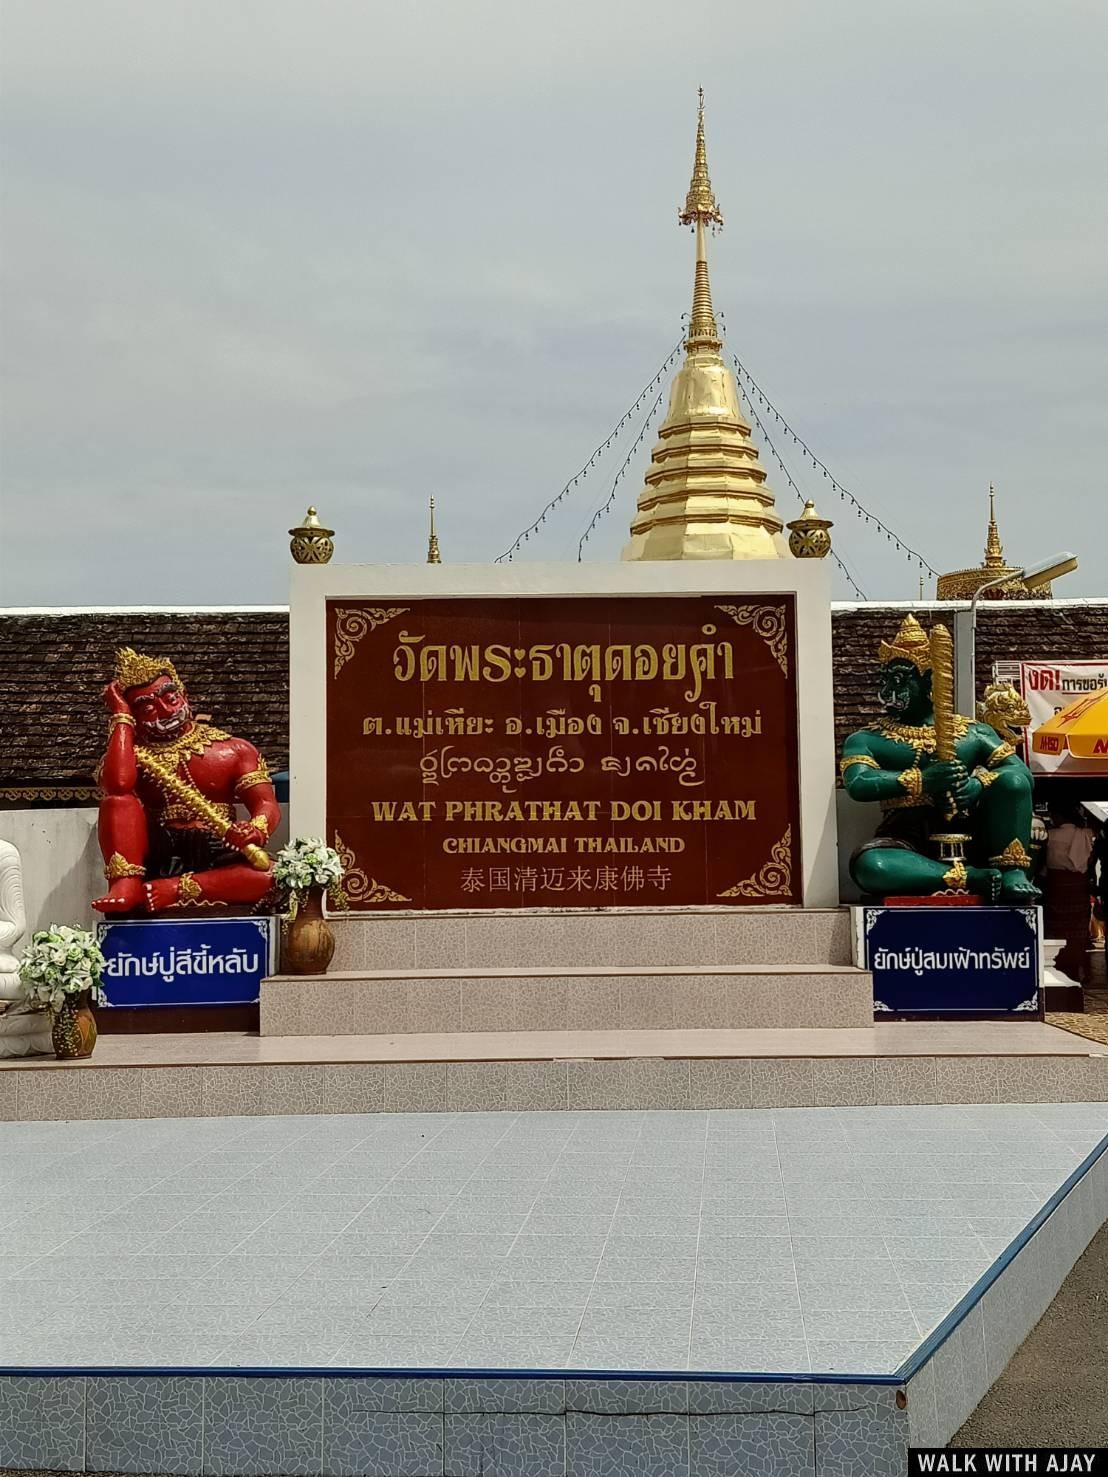 Exploring in Chiangmai : Thailand (Apr’21) – Day 6 22